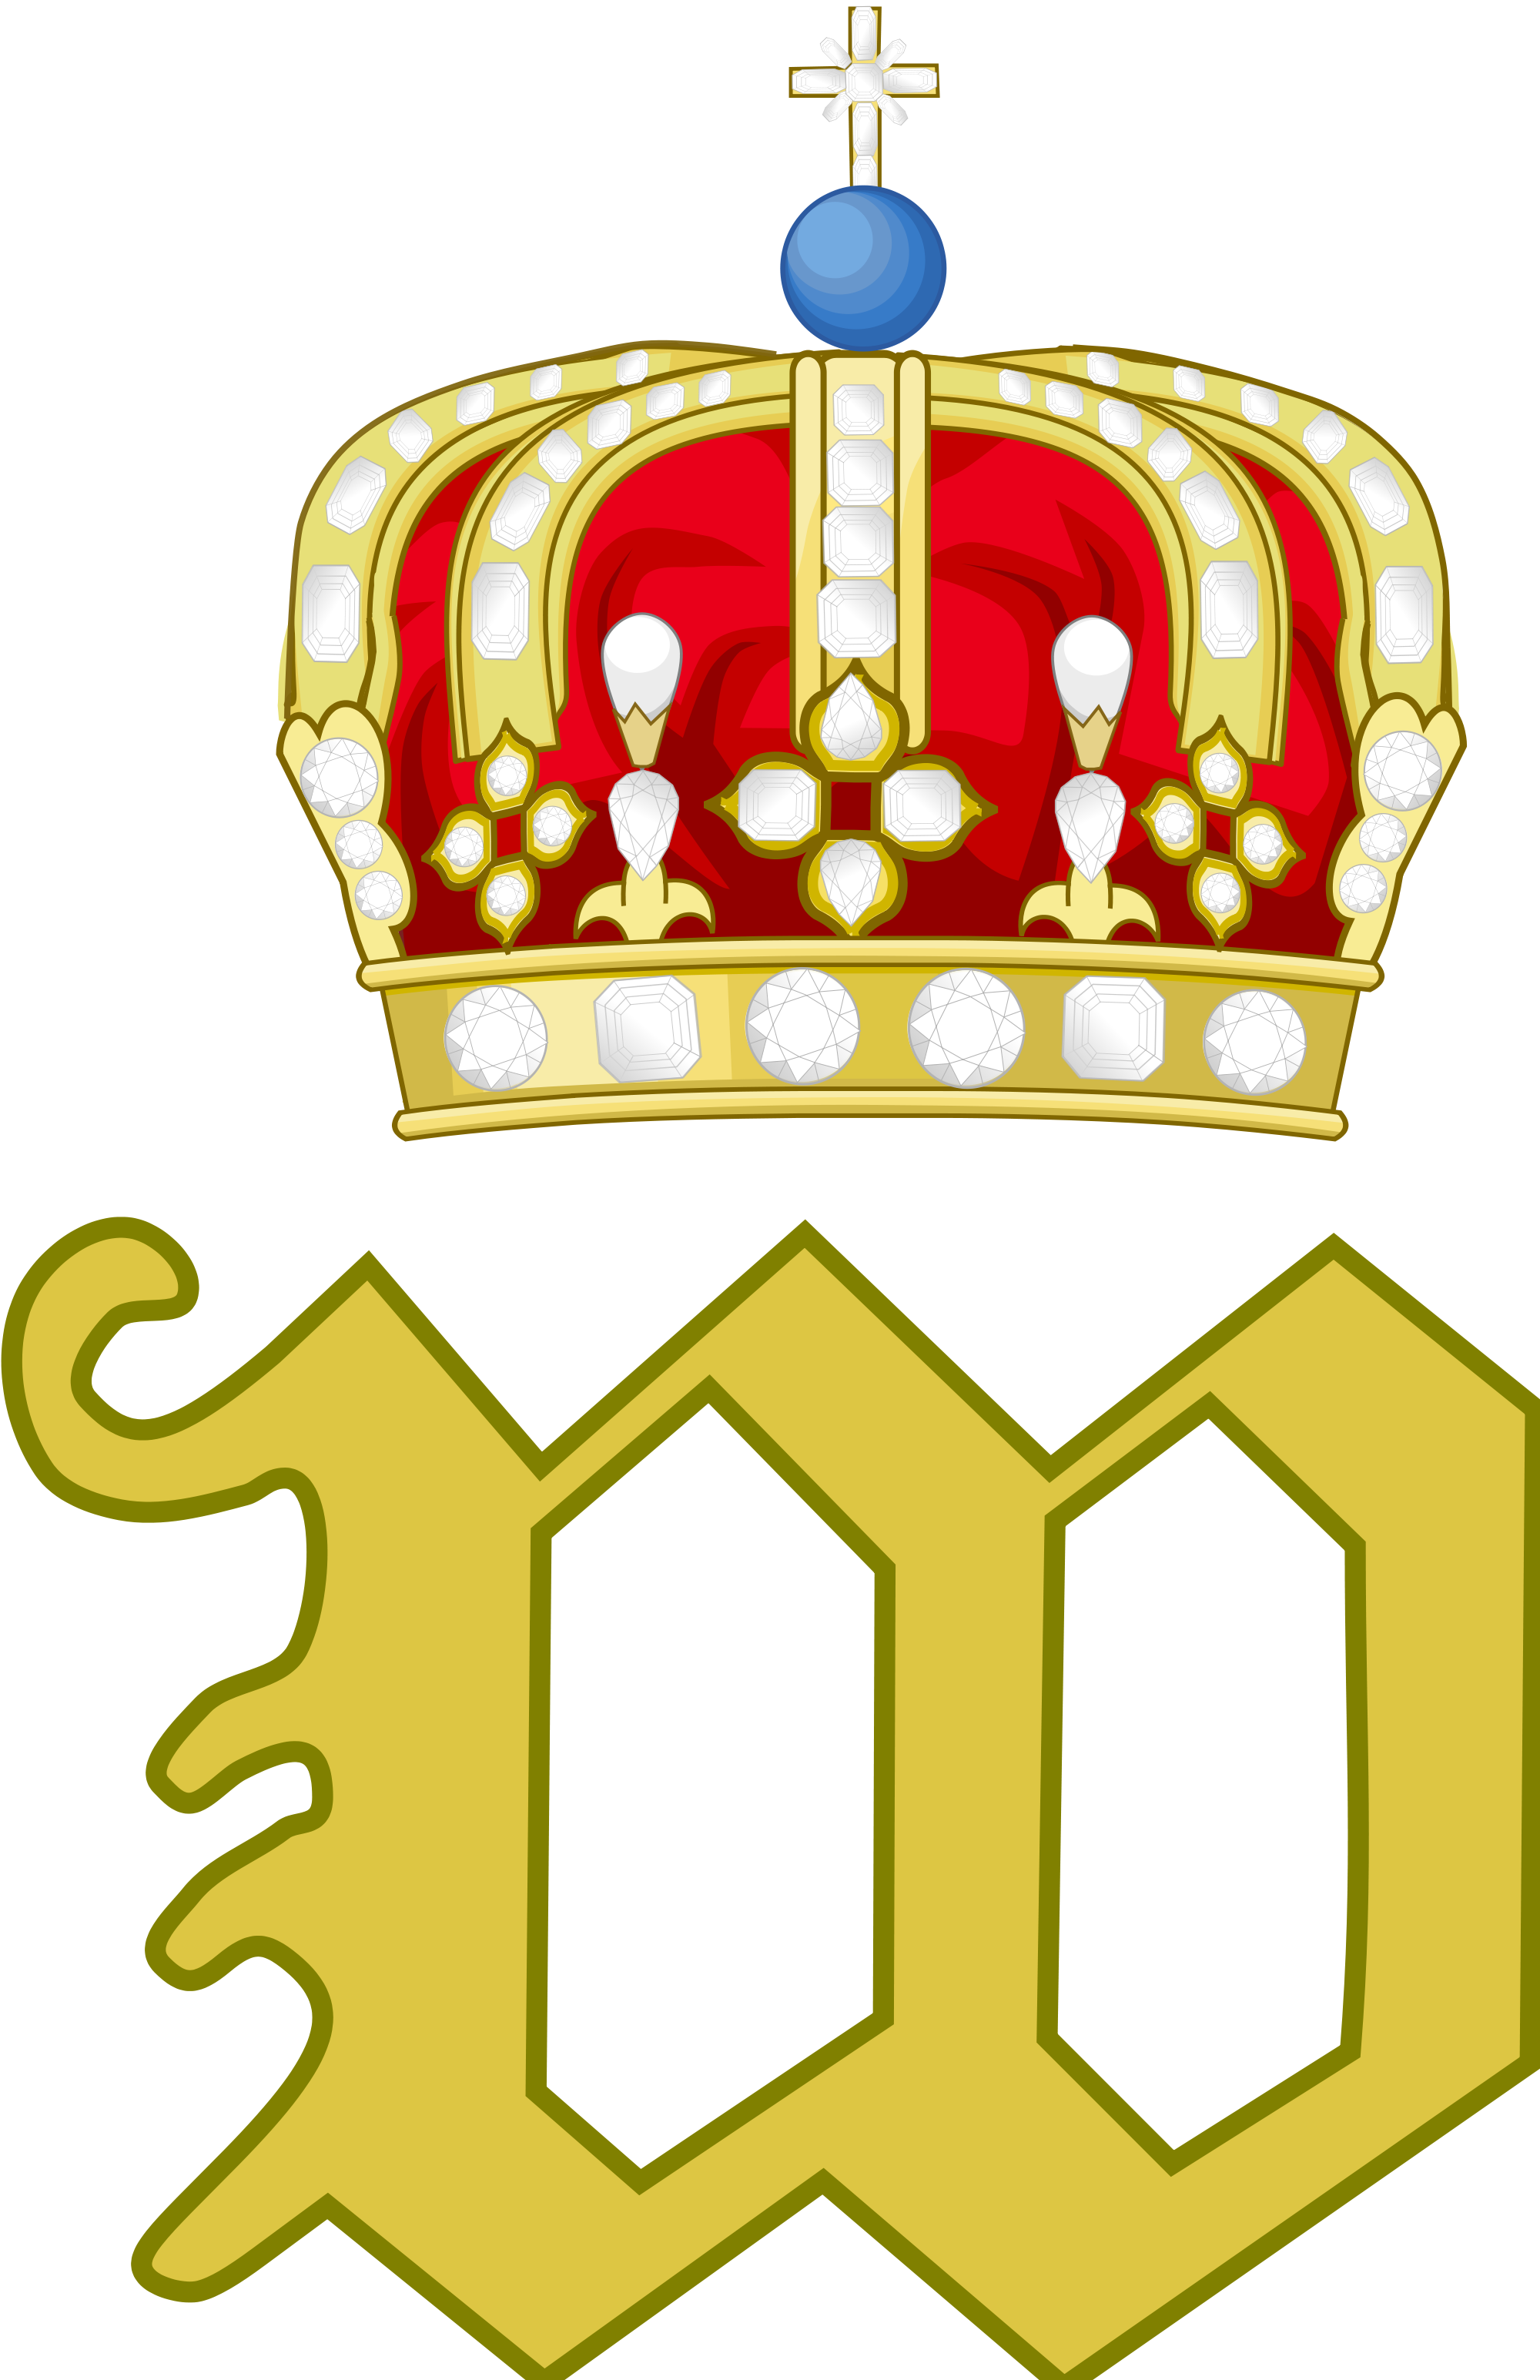 king clipart sire